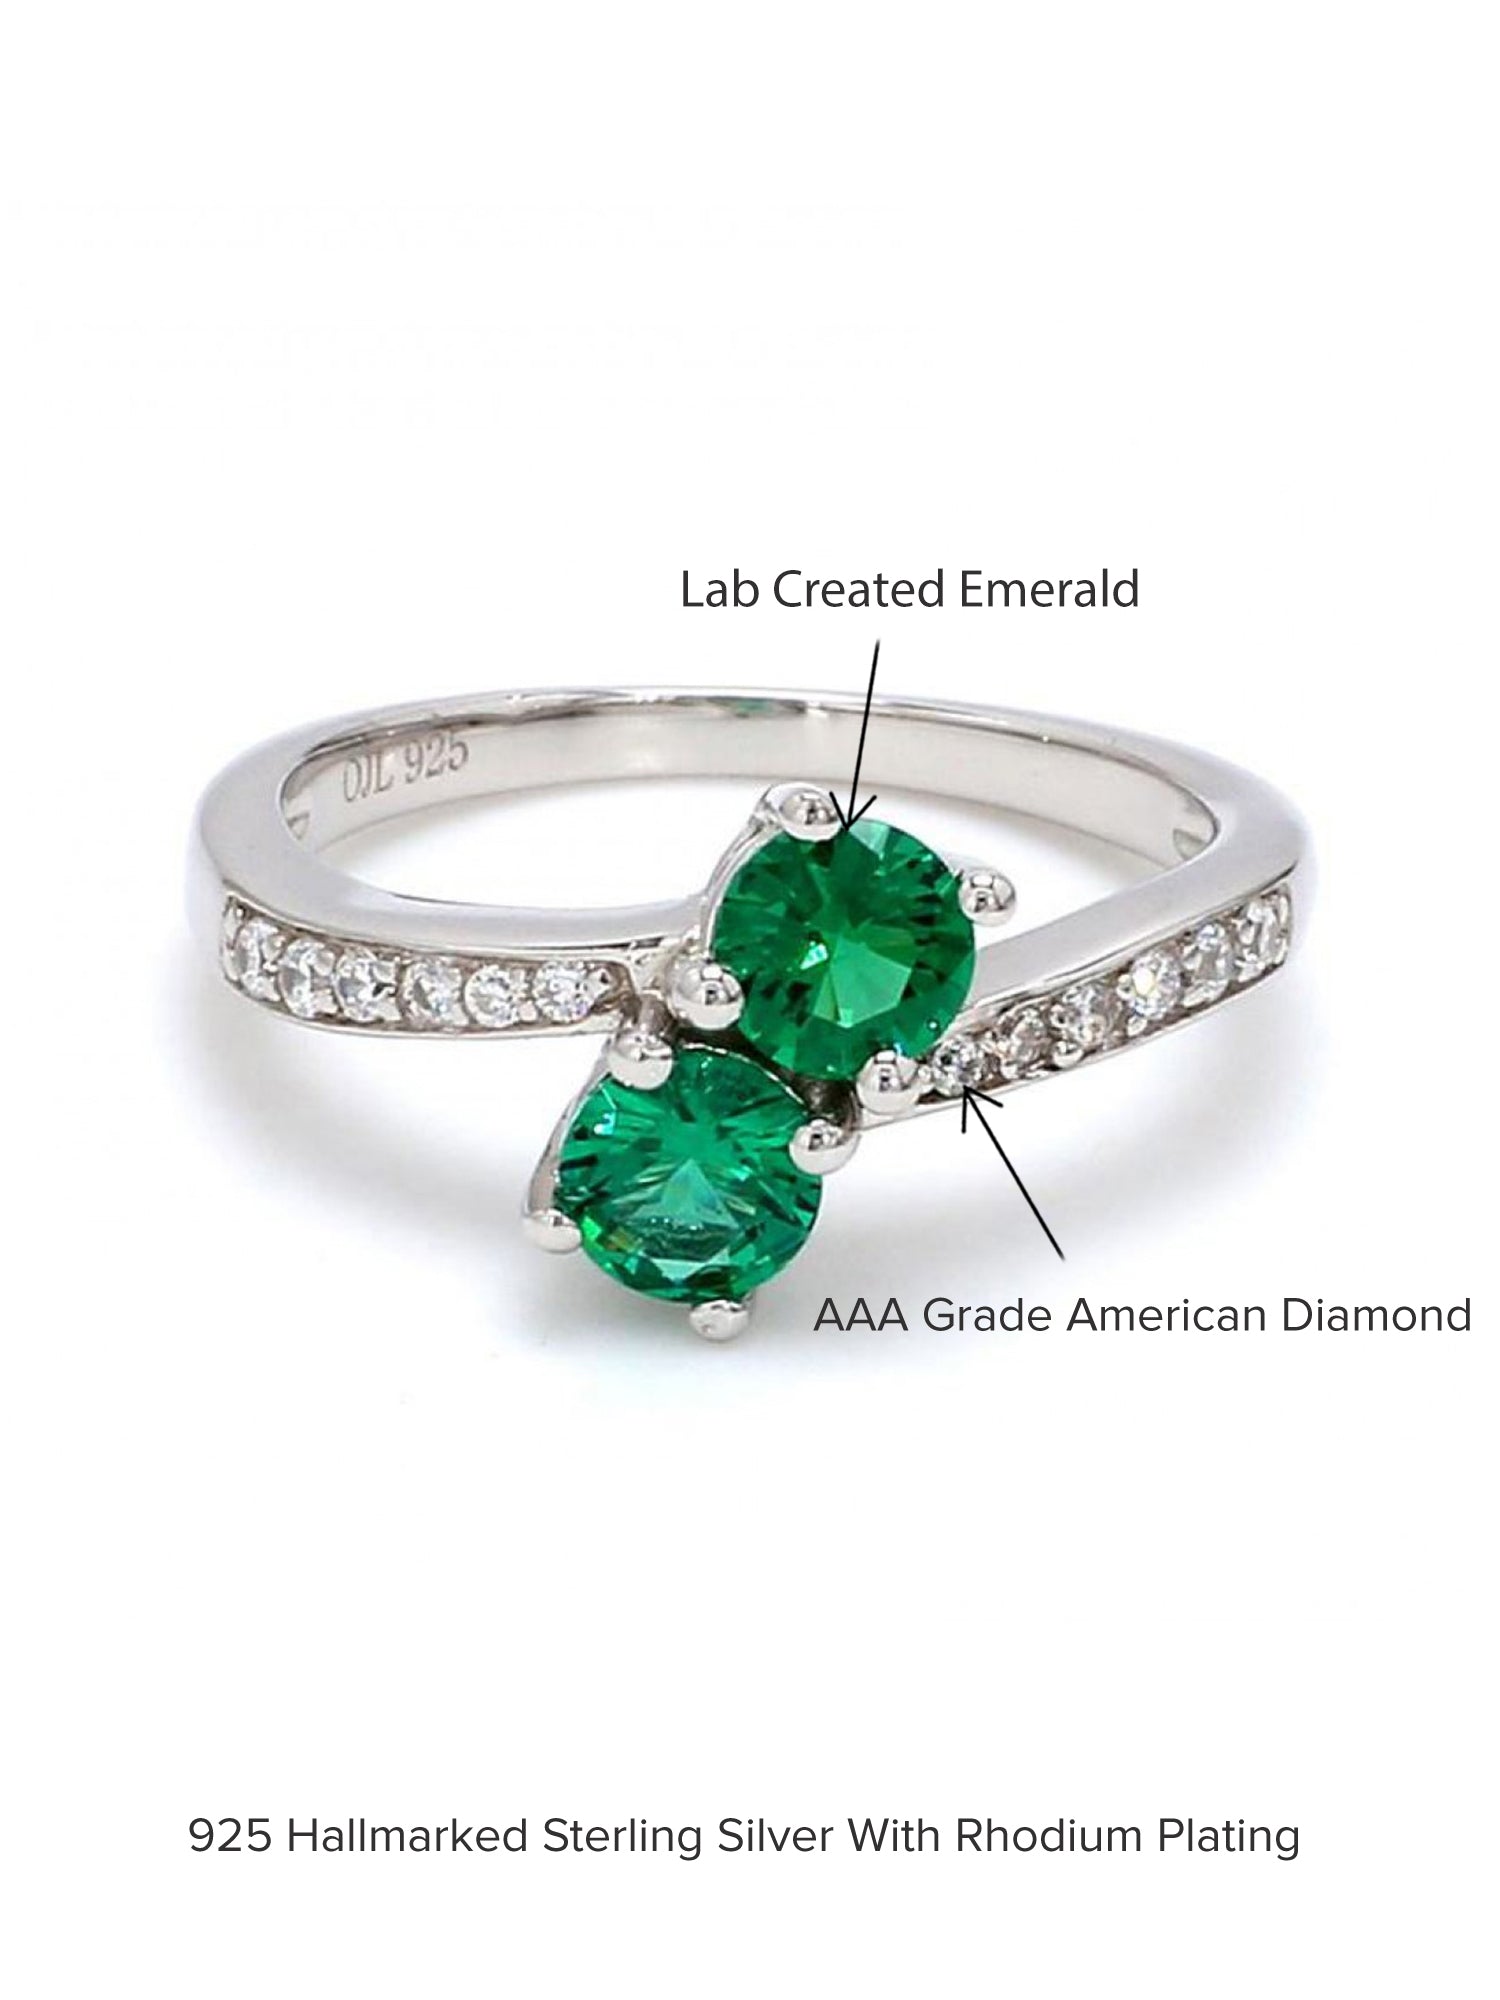 DOUBLE SOLITAIRE EMERALD SILVER RING-3